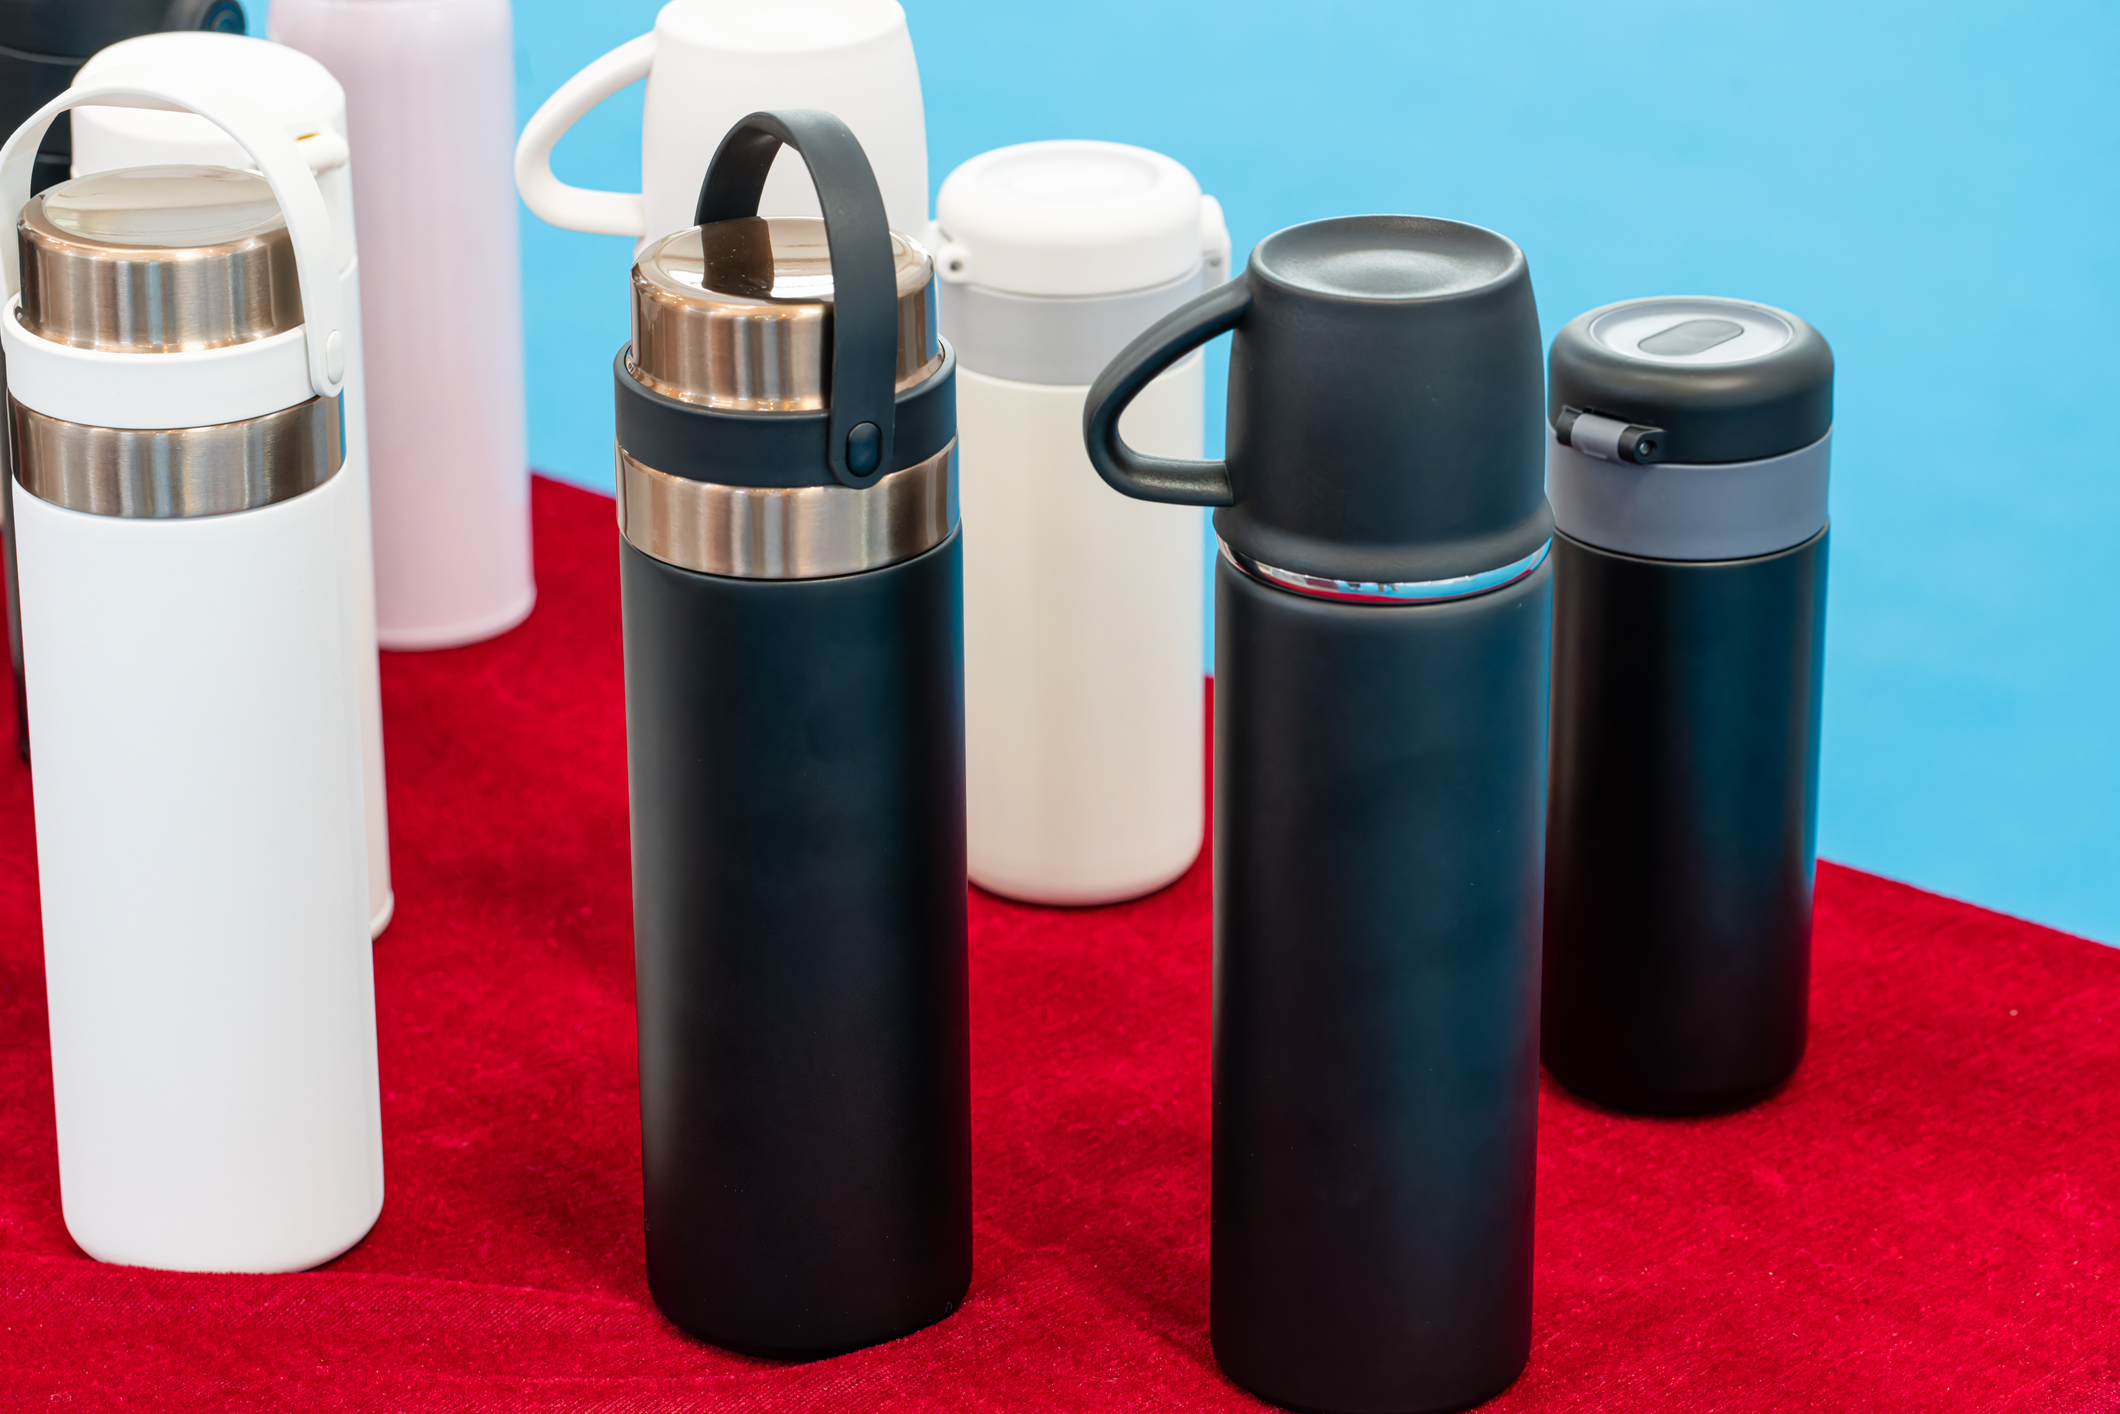 A variety of black and white reusable mugs and bottles on a red carpet